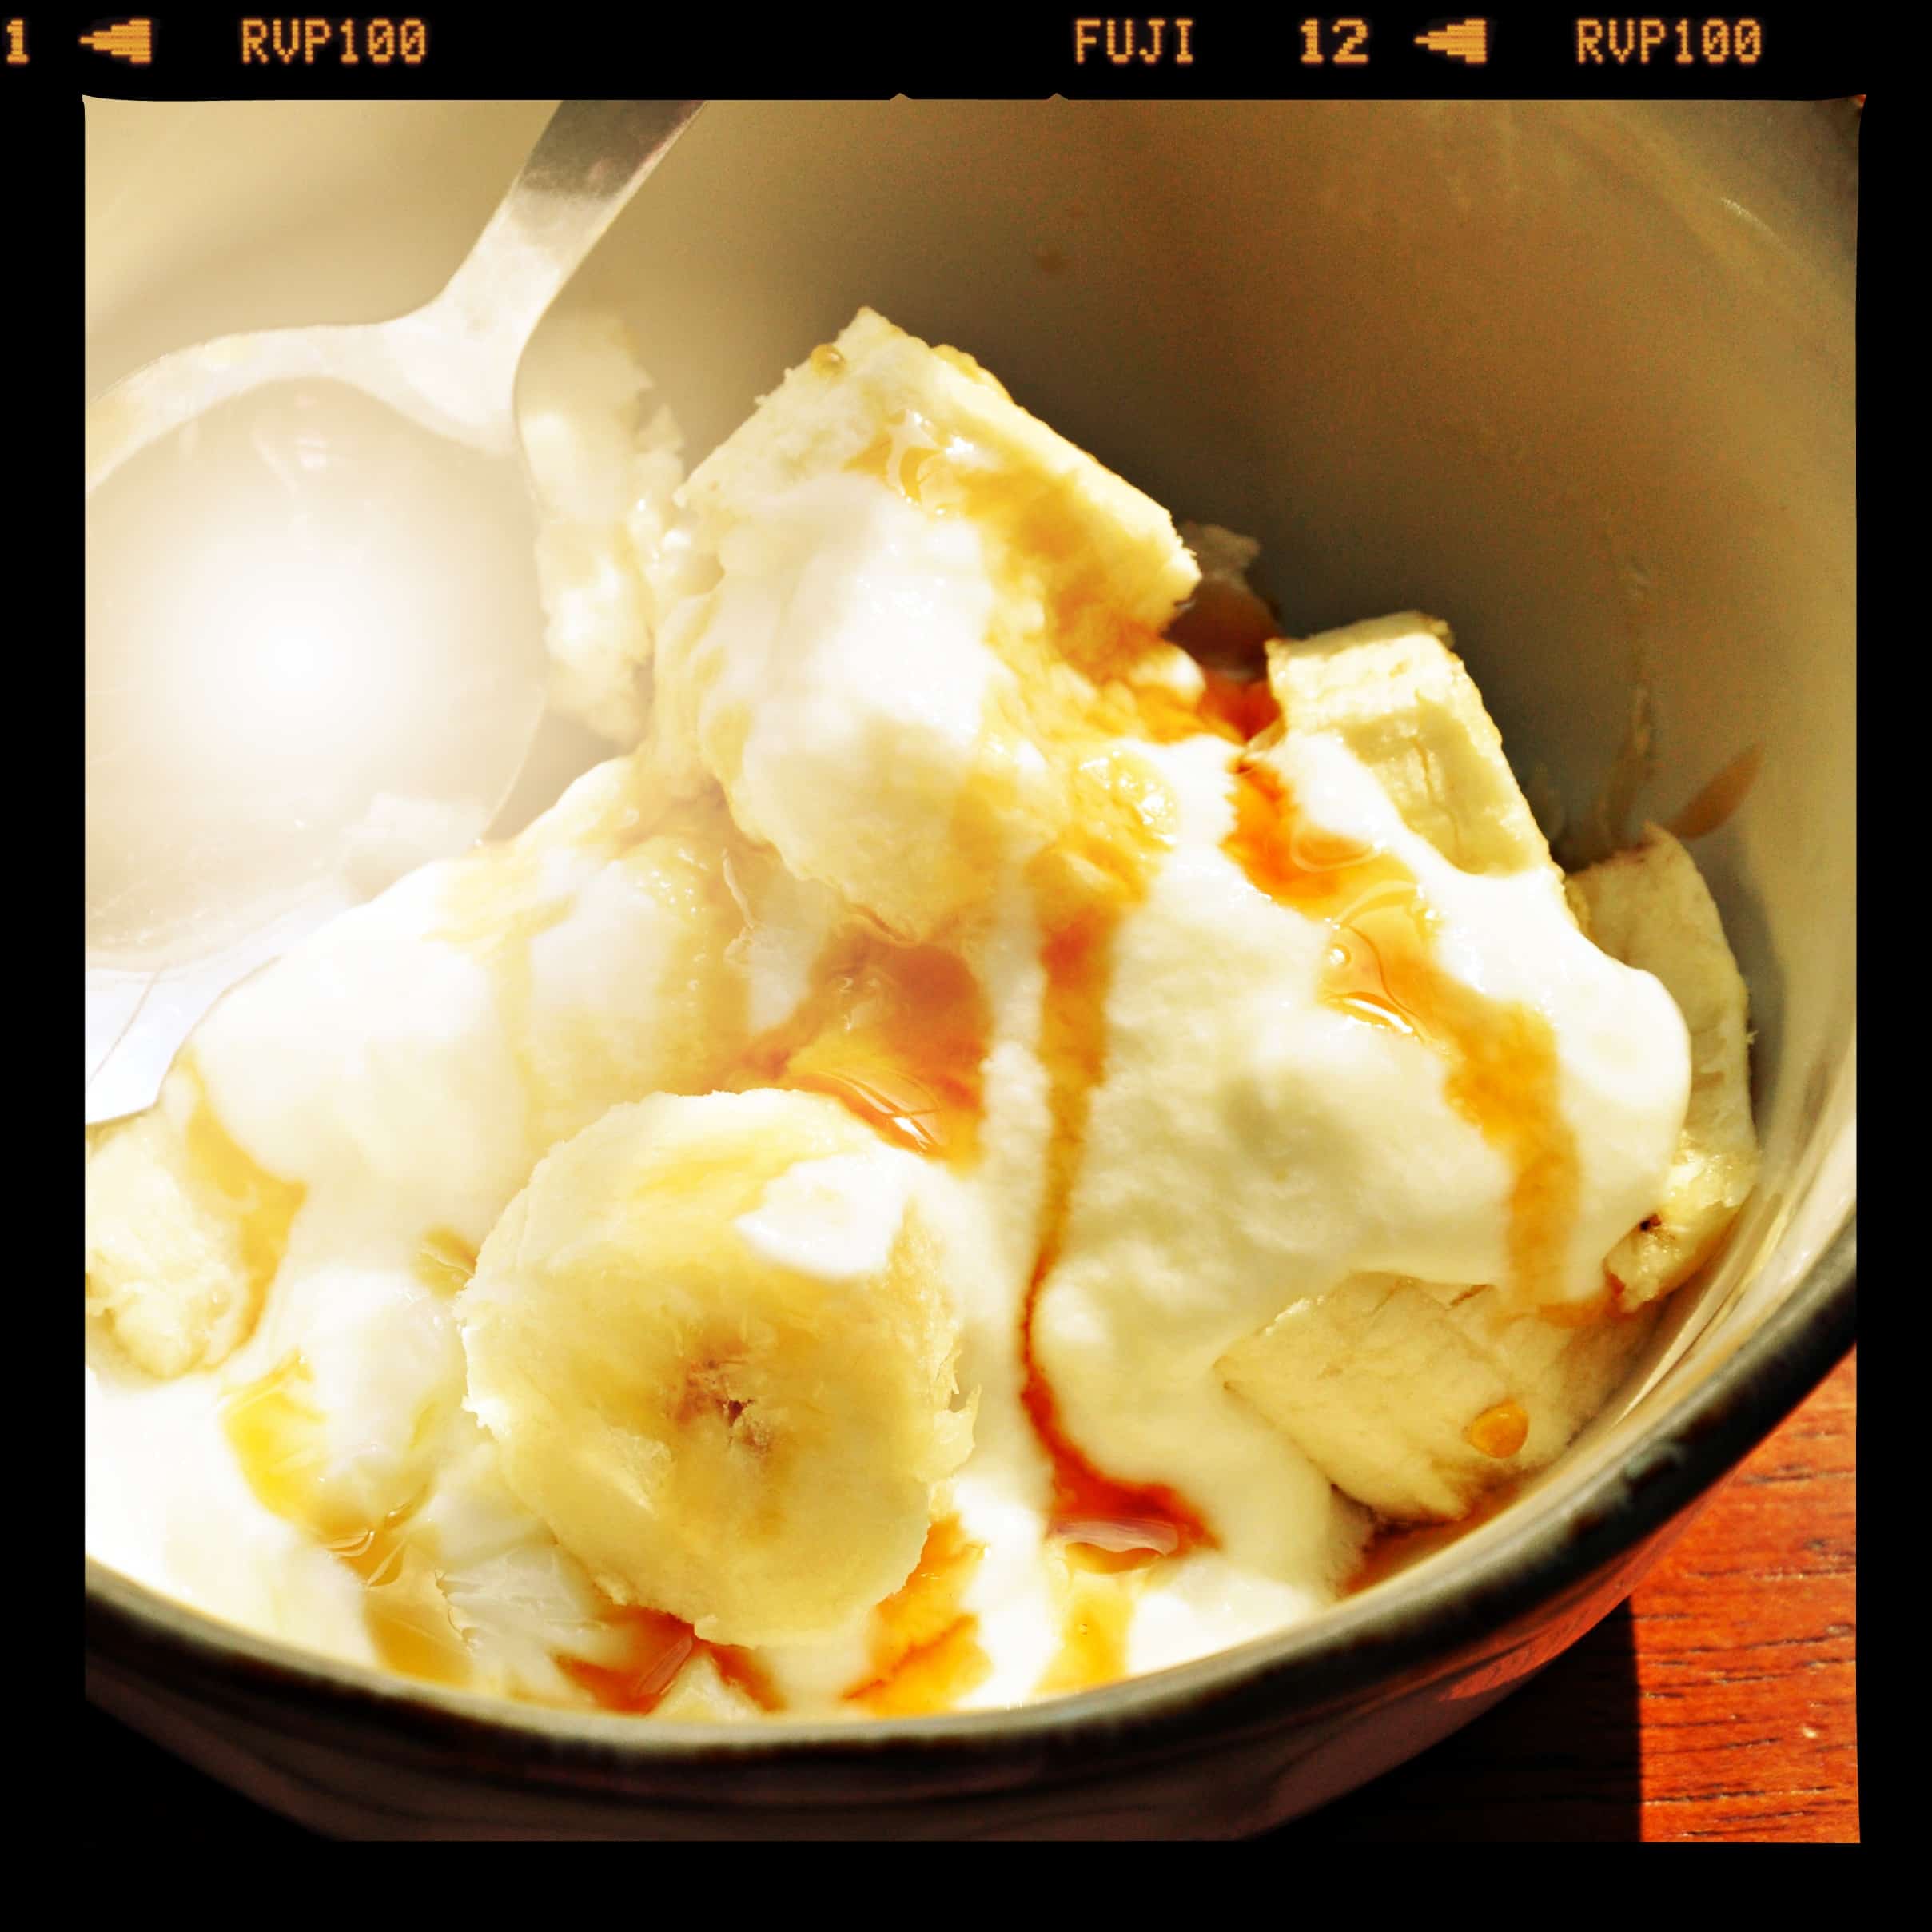 4 quick gluten free banana breakfast ideas from knowgluten.me - bananas with organic yogurt and raw honey with sunburst filter and film frame